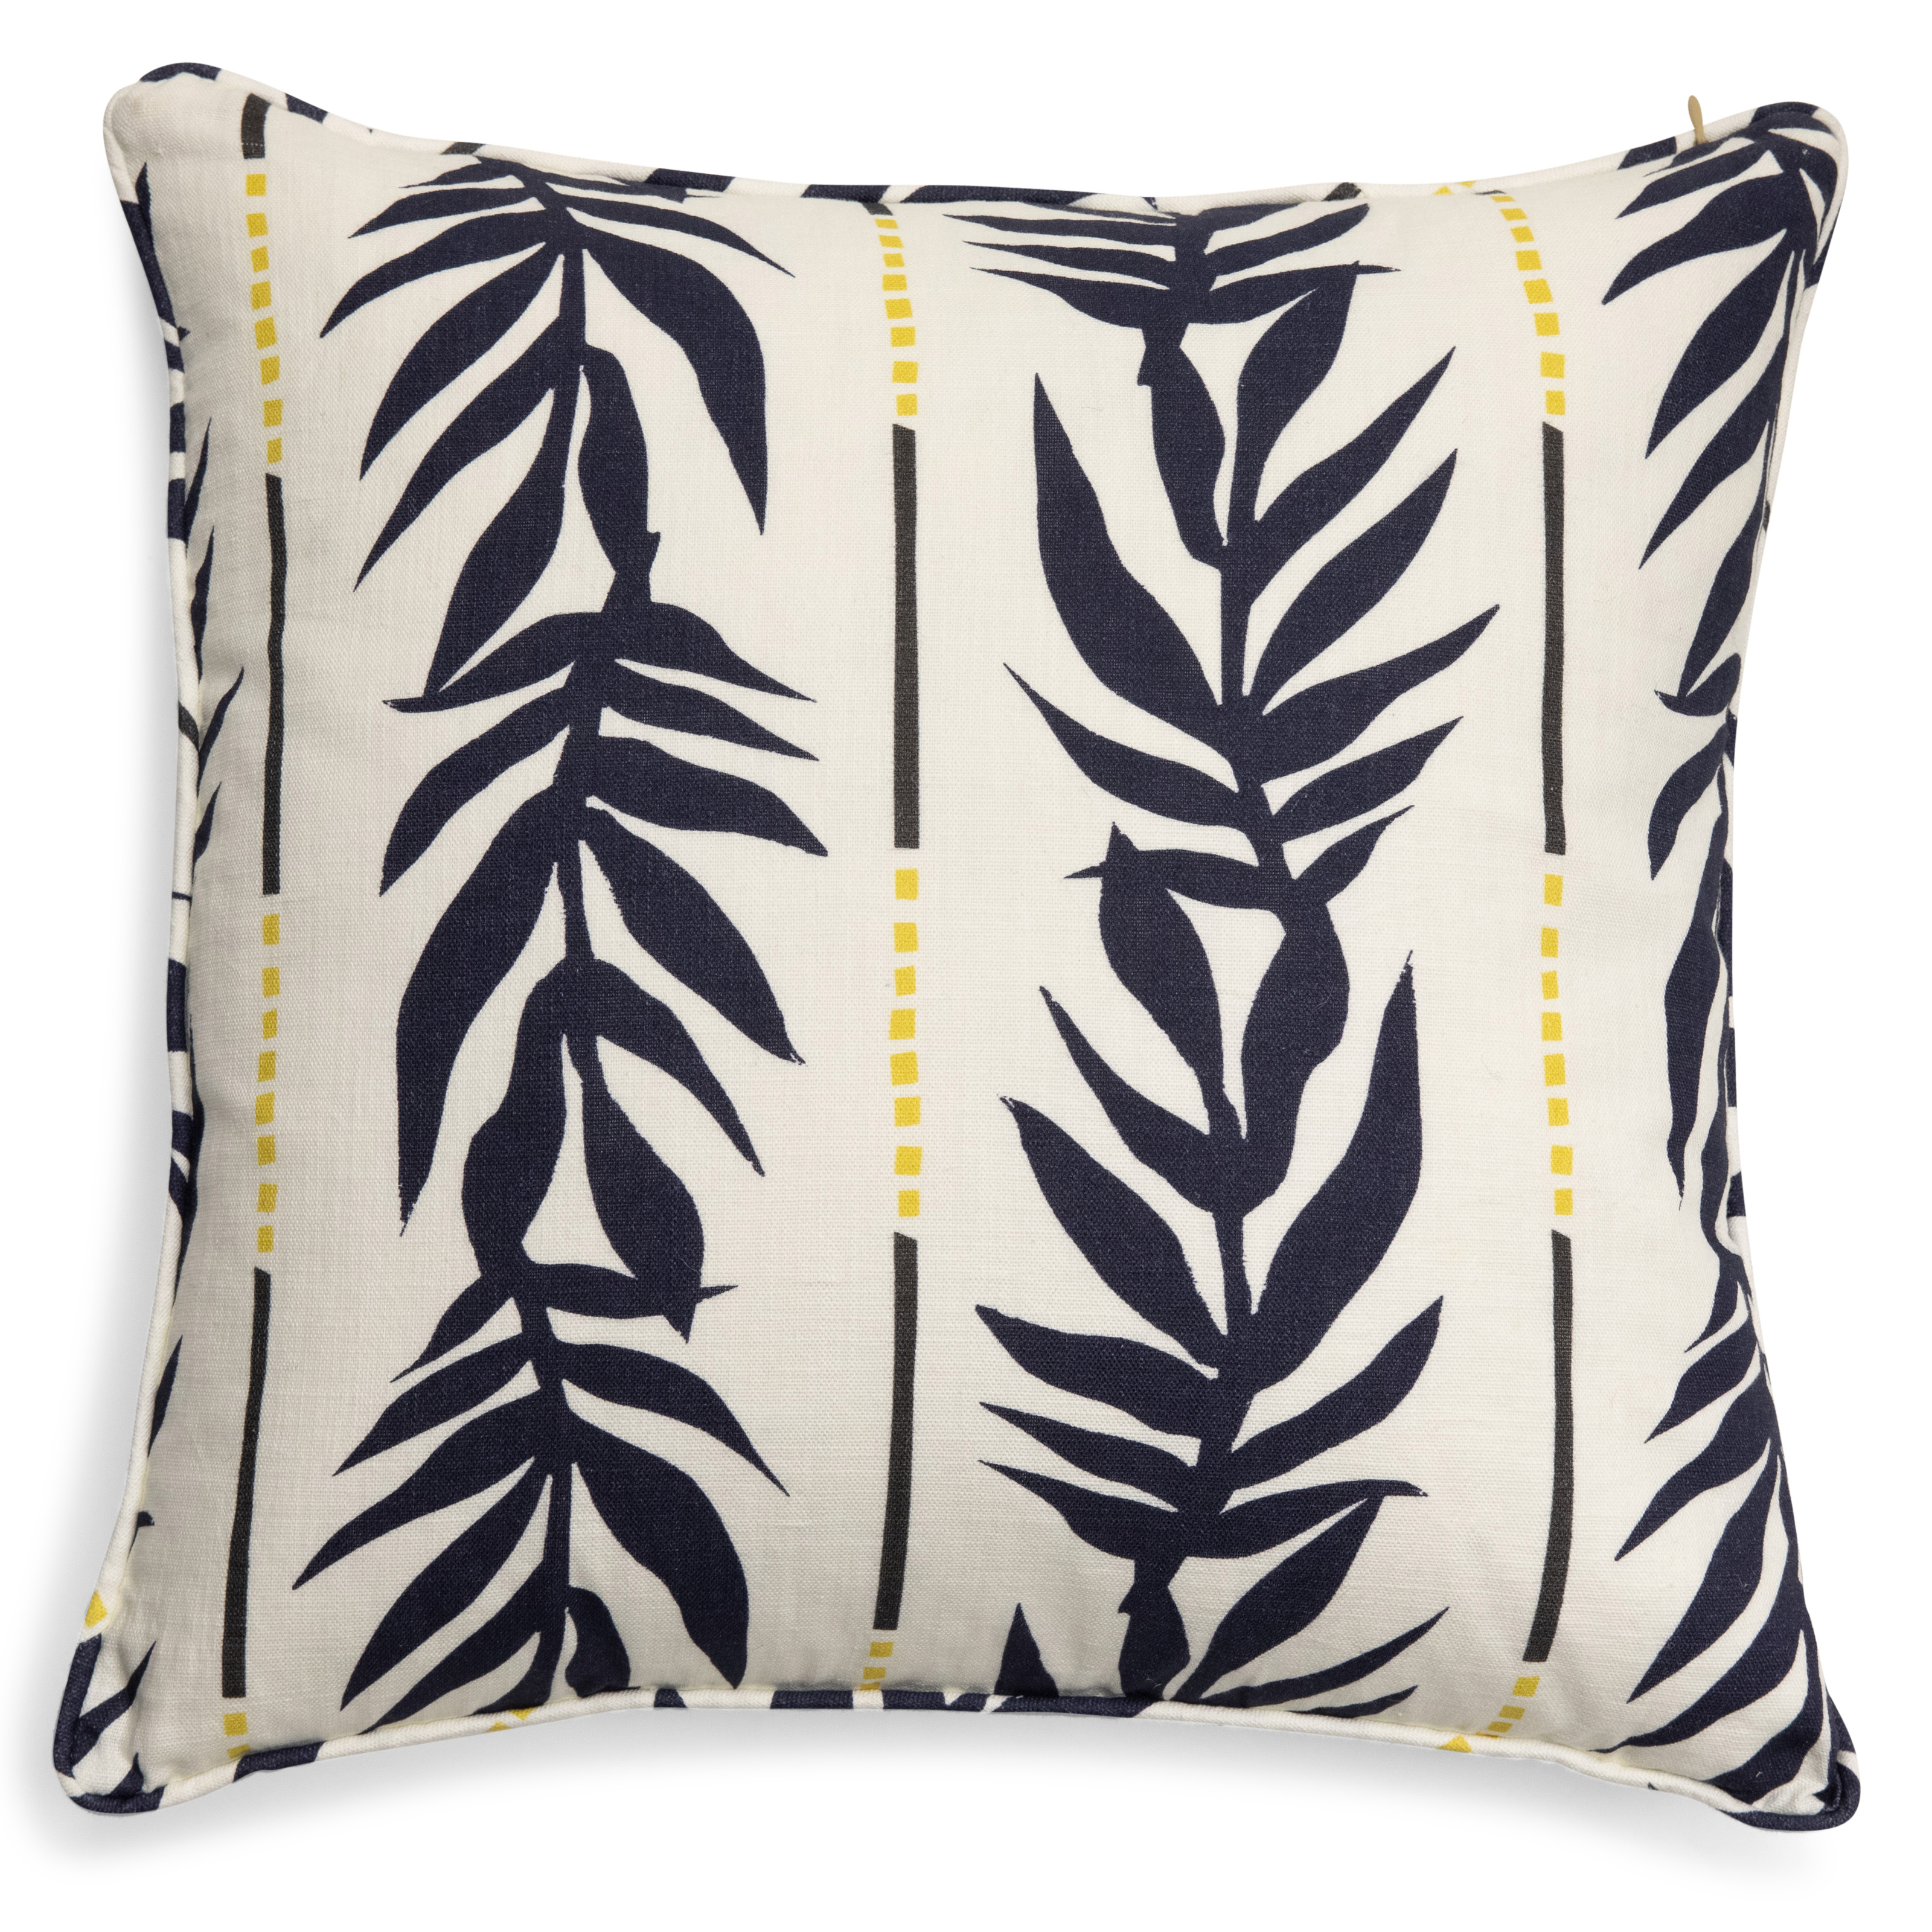 Cheap Throw Pillows For Couch Or Bed Decor Under $40